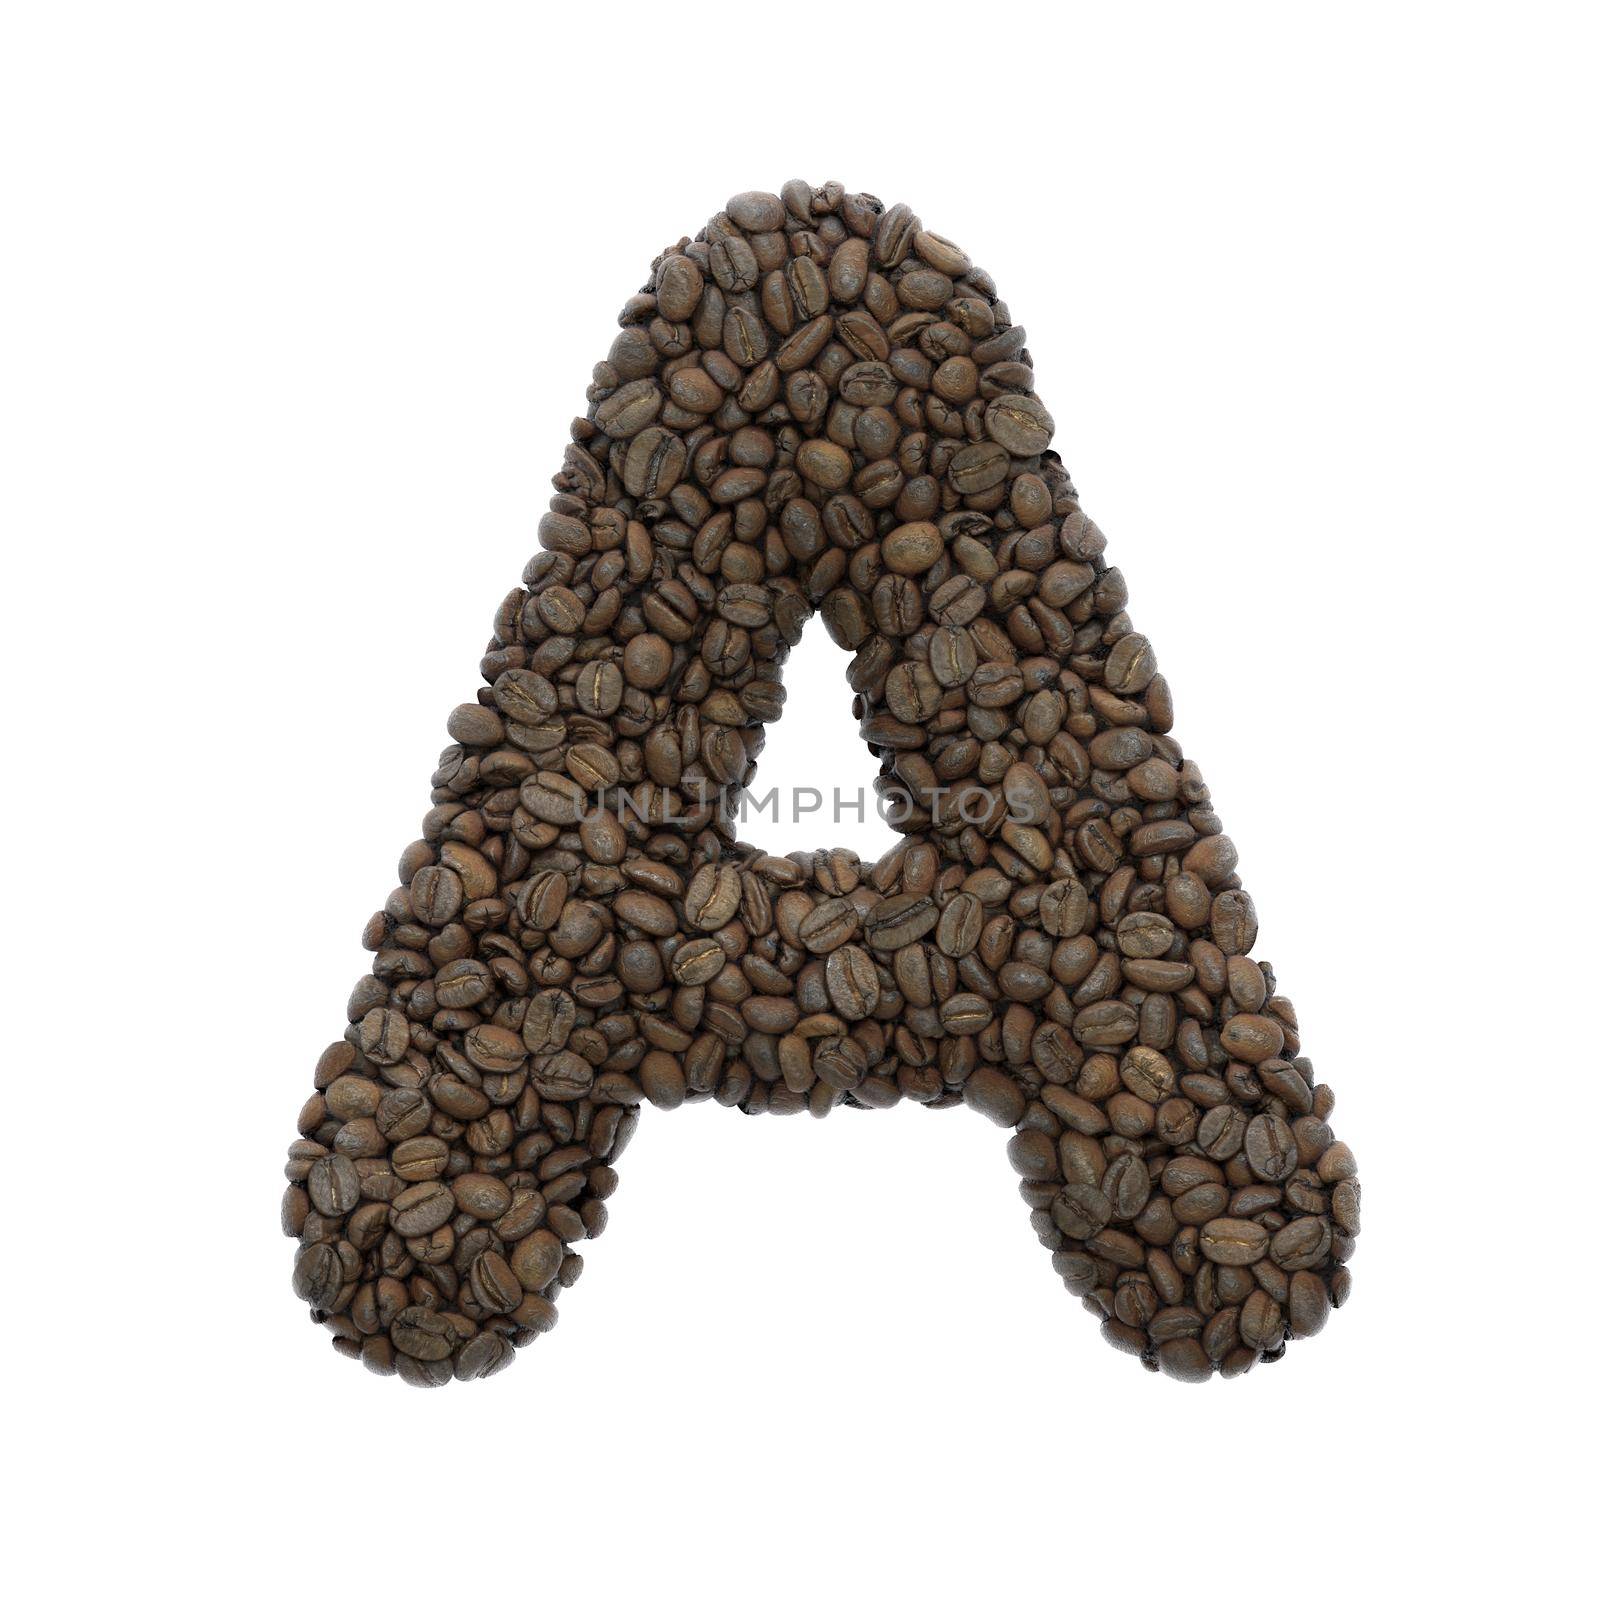 Coffee letter A - Capital 3d roasted beans font - suitable for Coffee, energy or insomnia related subjects by chrisroll